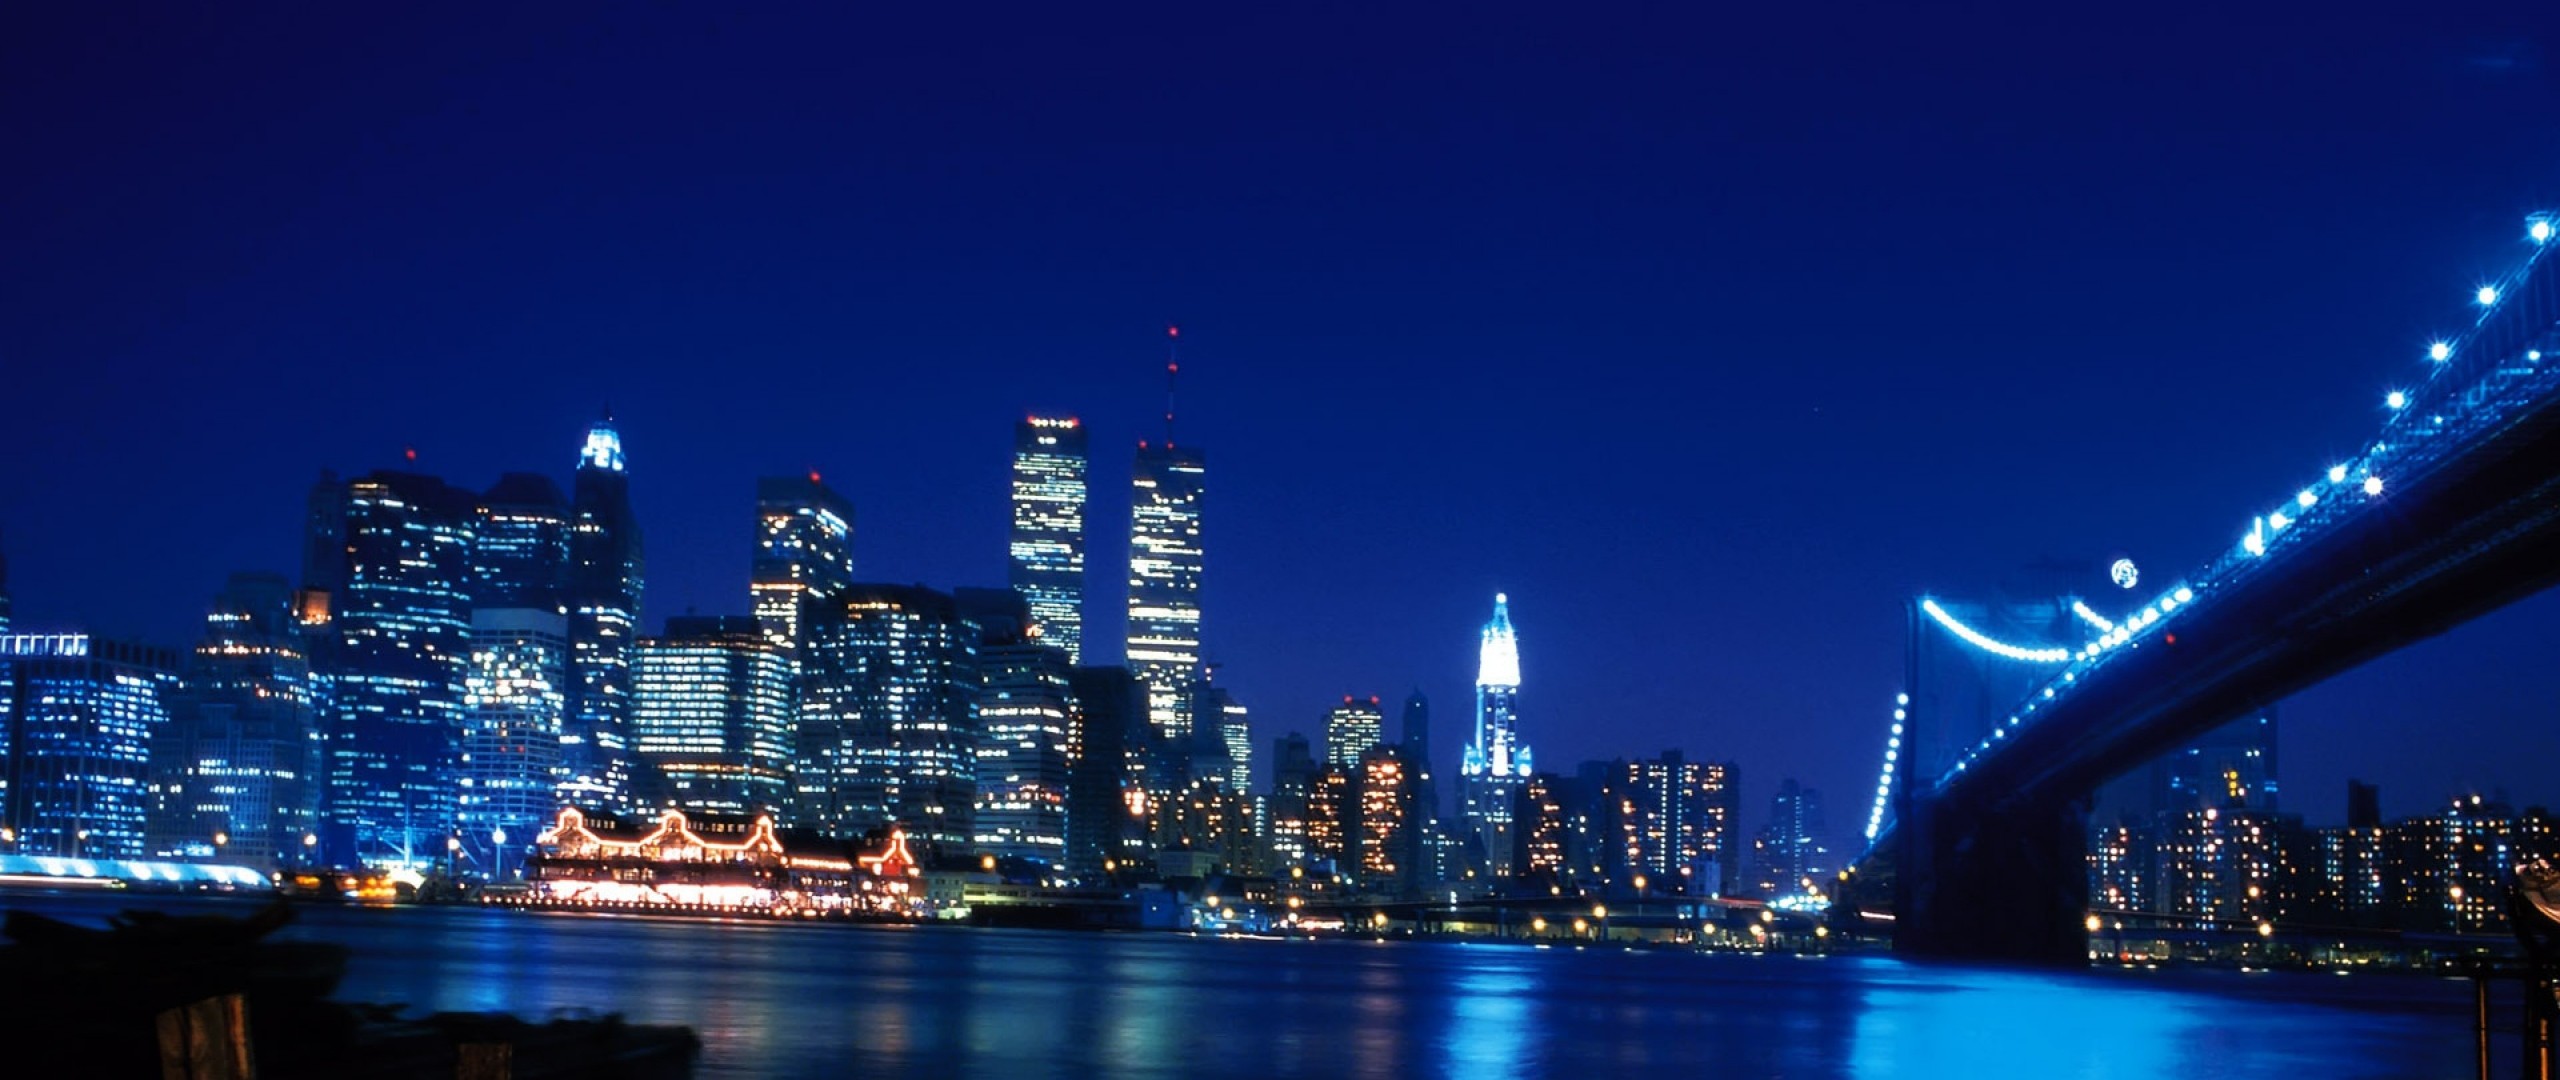 2560x1080 Download Wallpaper  Twin towers, New york, World trade center .